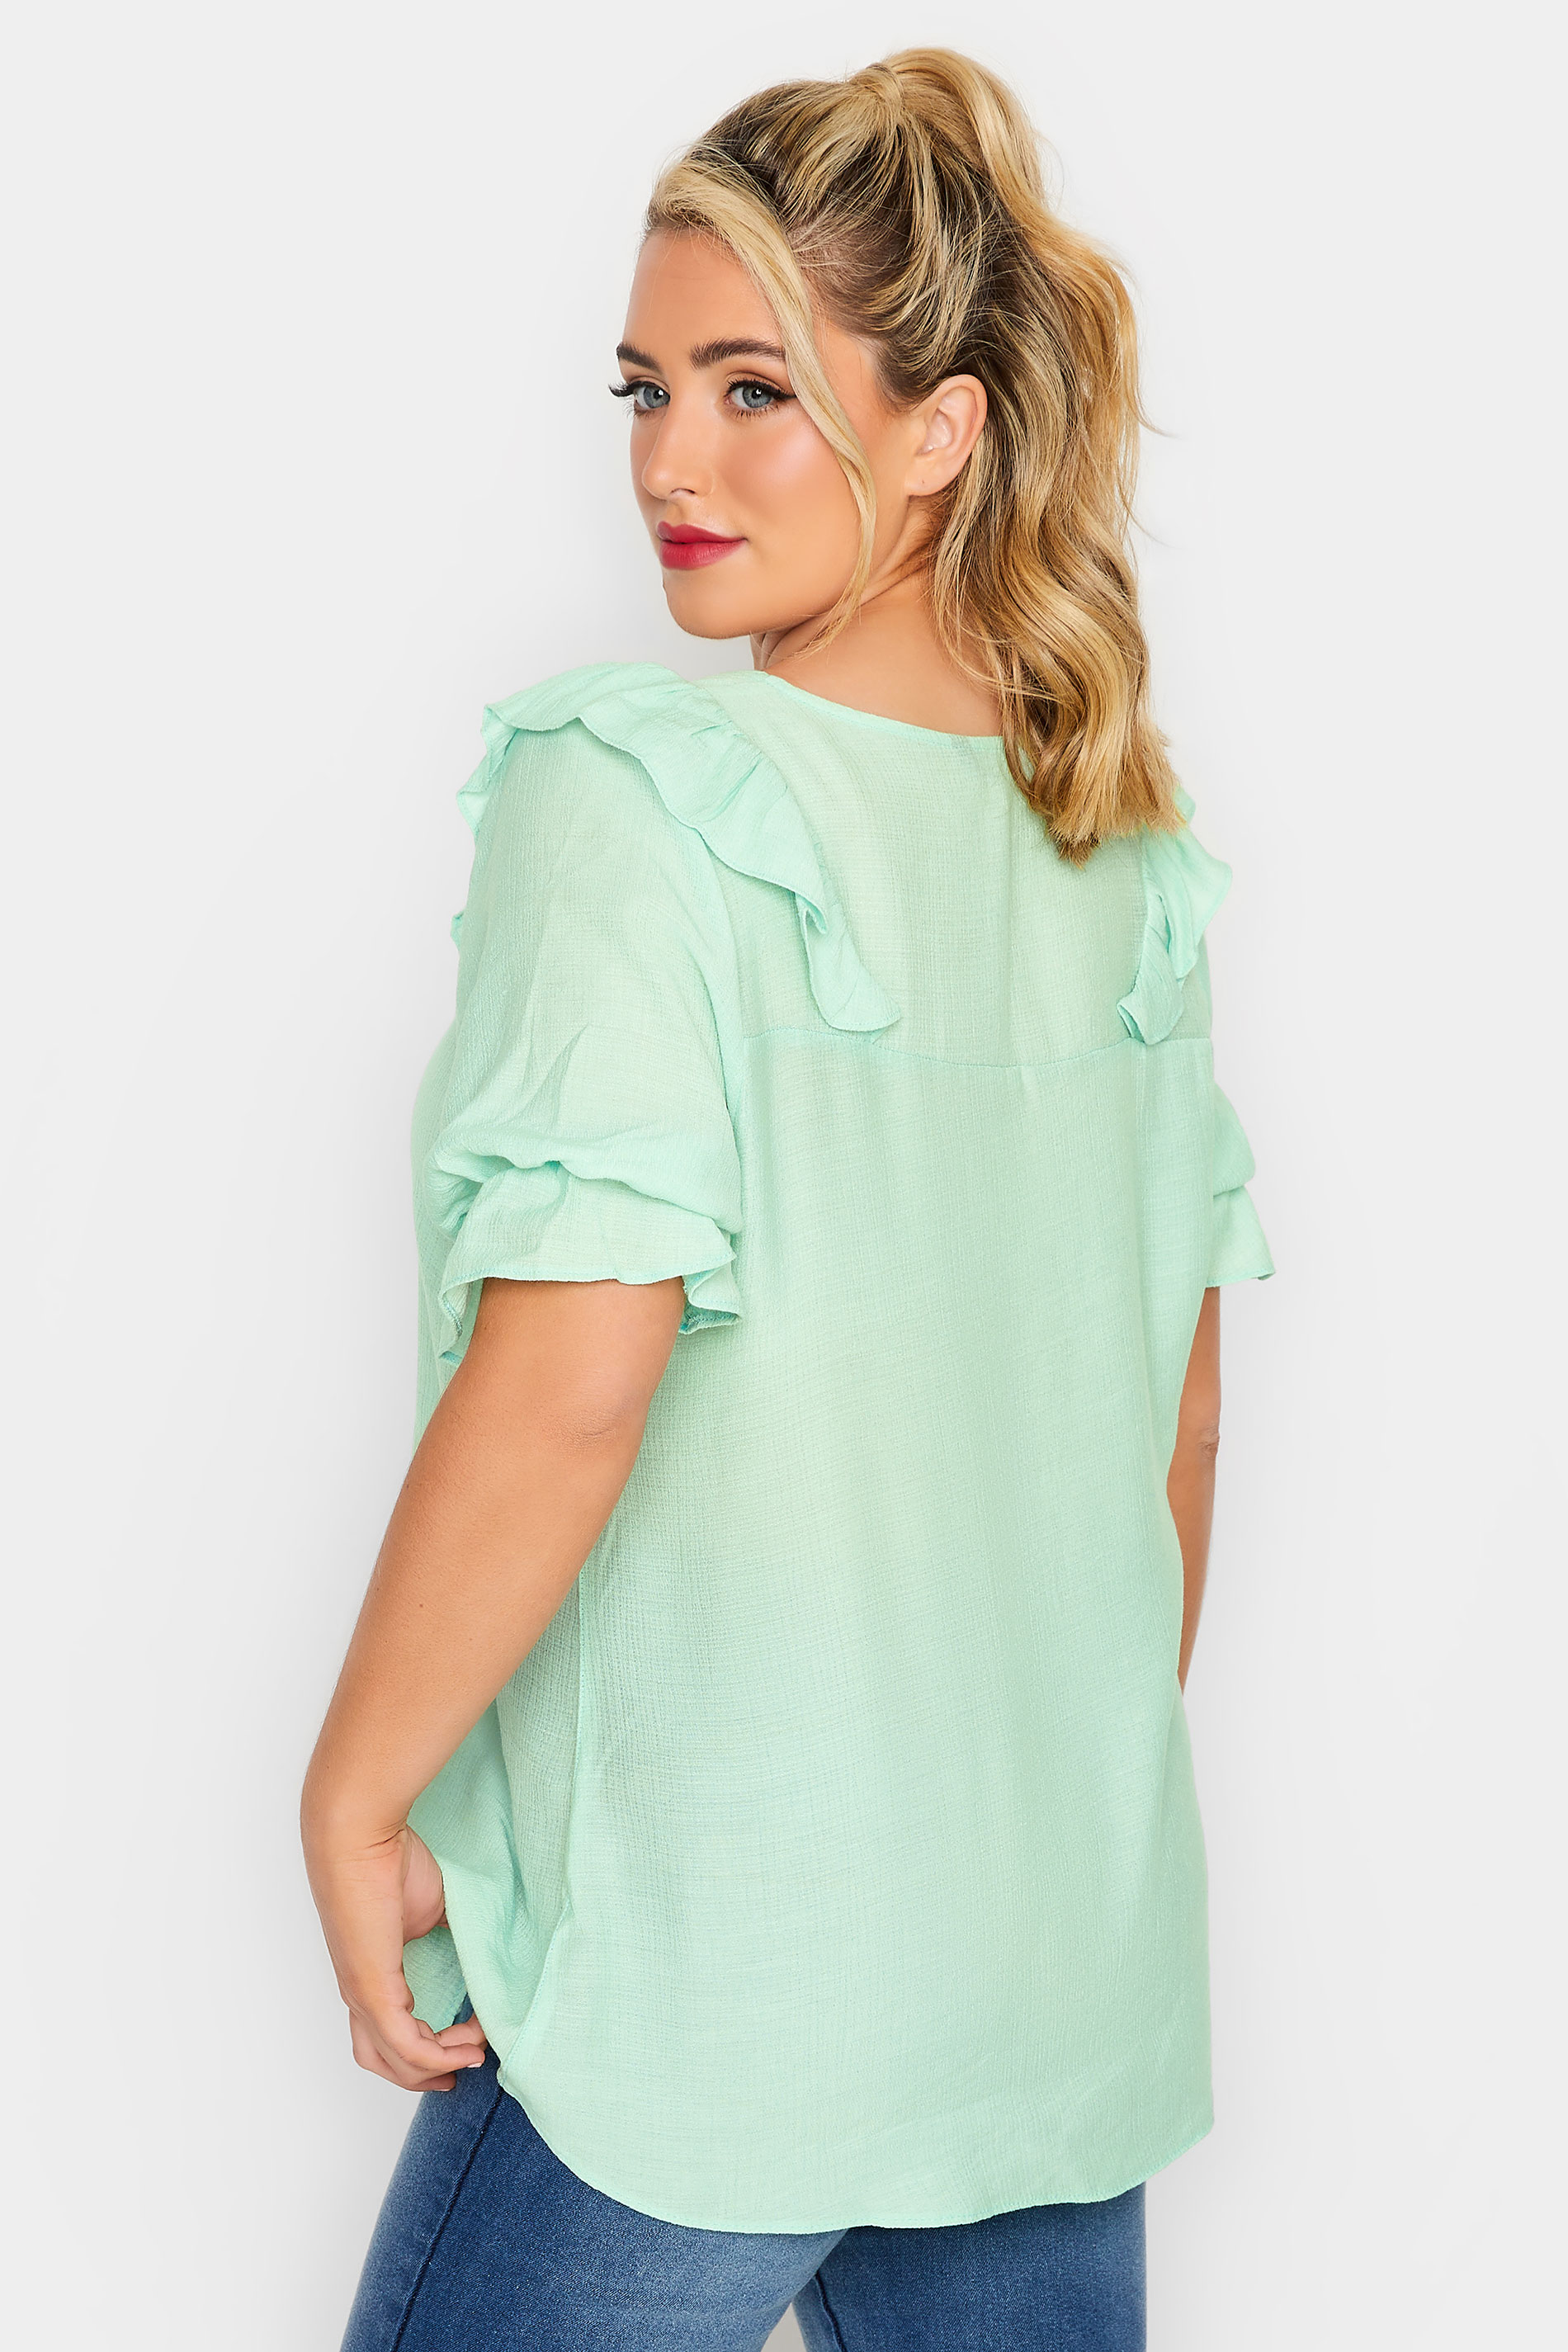 LIMITED COLLECTION Plus Size Mint Green Frill Blouse | Yours Clothing 3